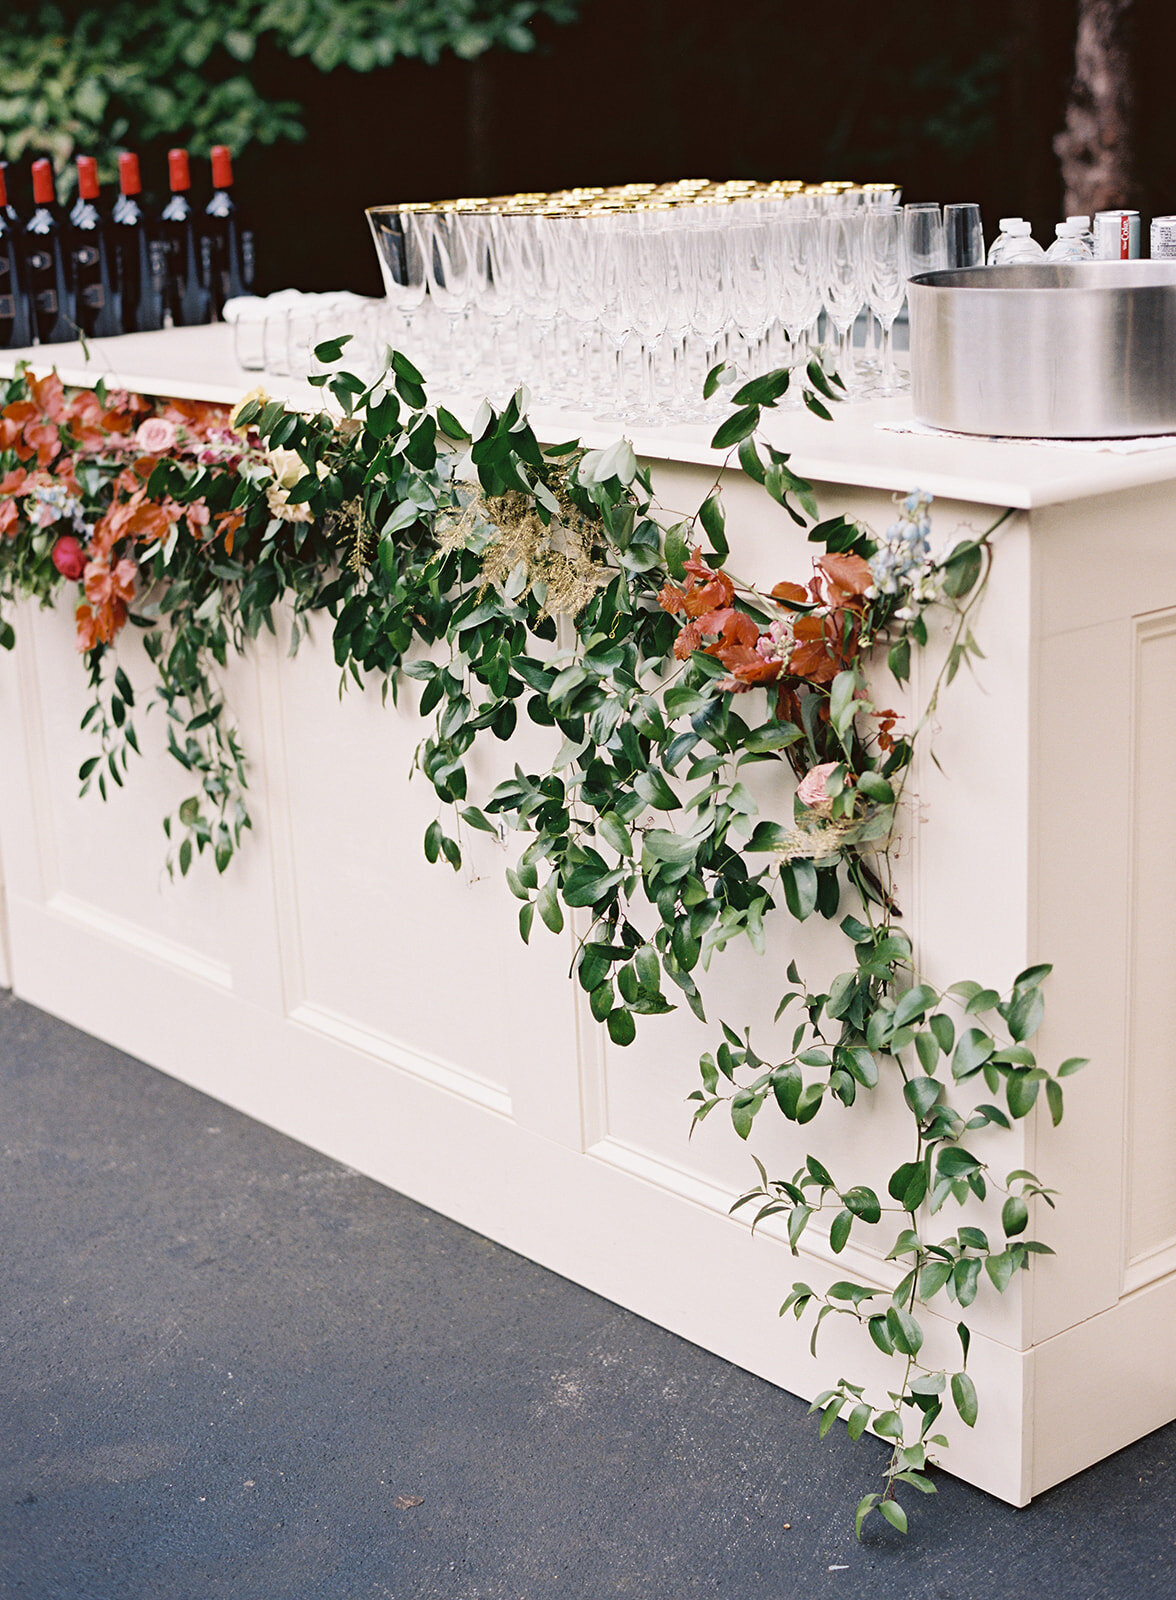 Floral installation on the front of the bar with smilax vines, copper beech, hops, and wildflowers. RT Lodge wedding and corporate event florist.